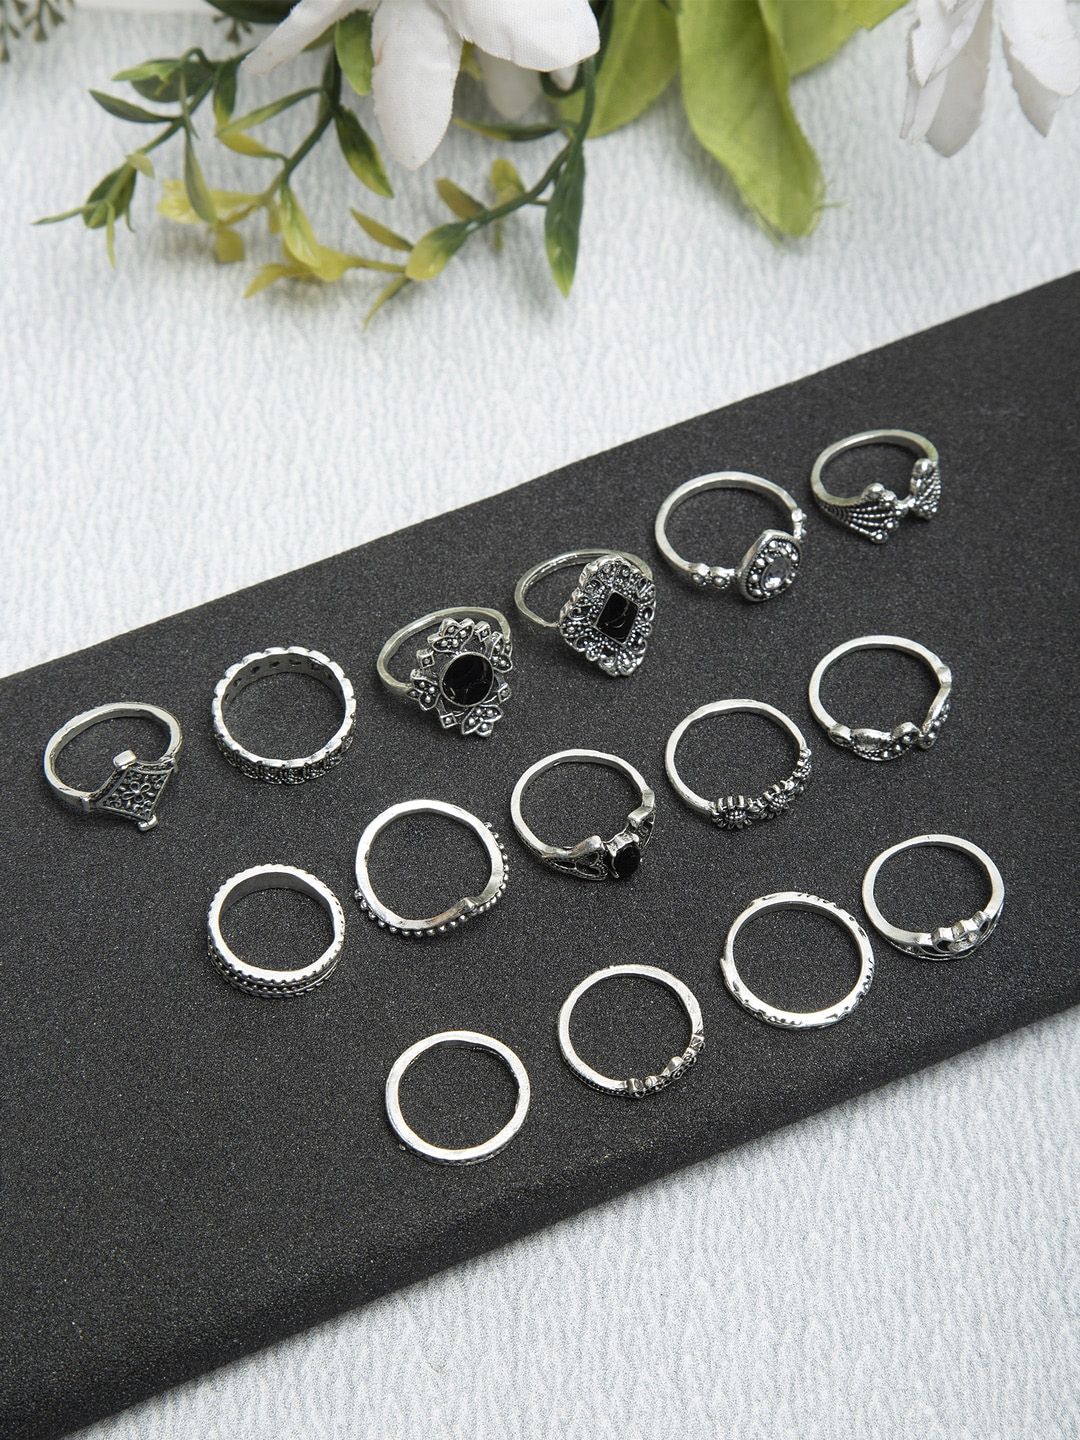 YouBella Women Set Of 15 Silver-Toned & Black Textured Finger Rings Price in India